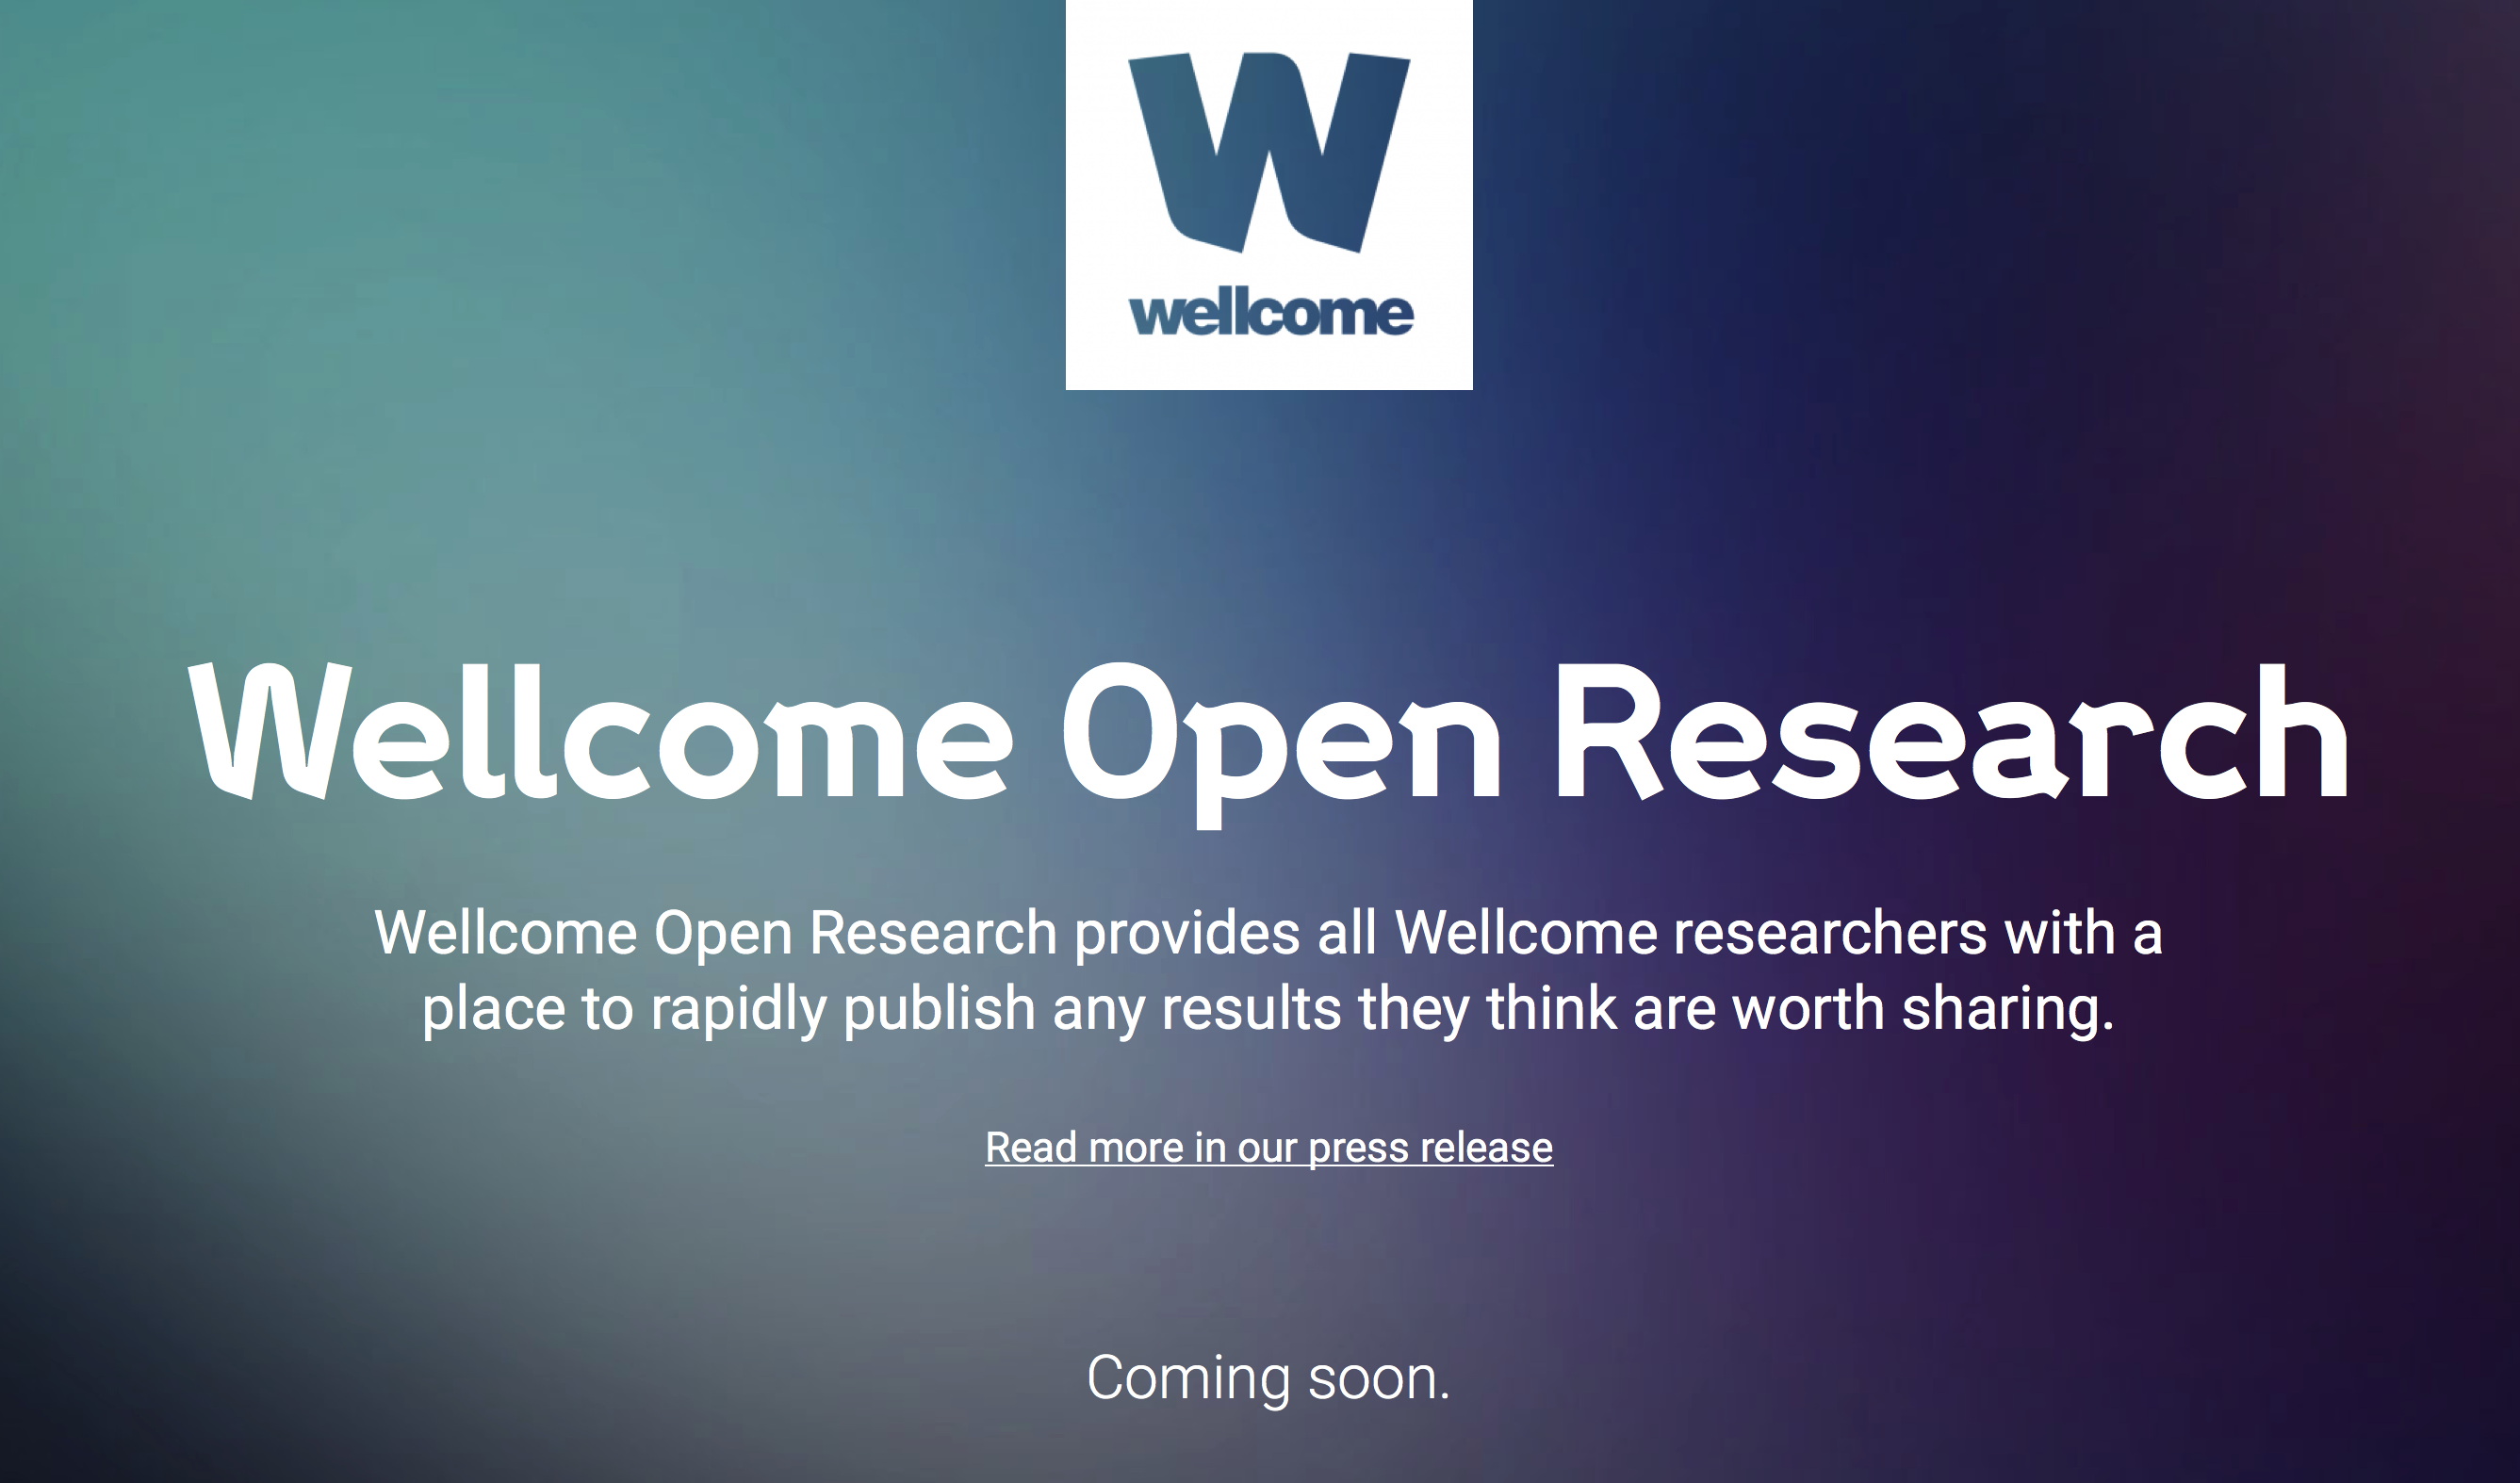 Wellcome_Open_Research.jpg